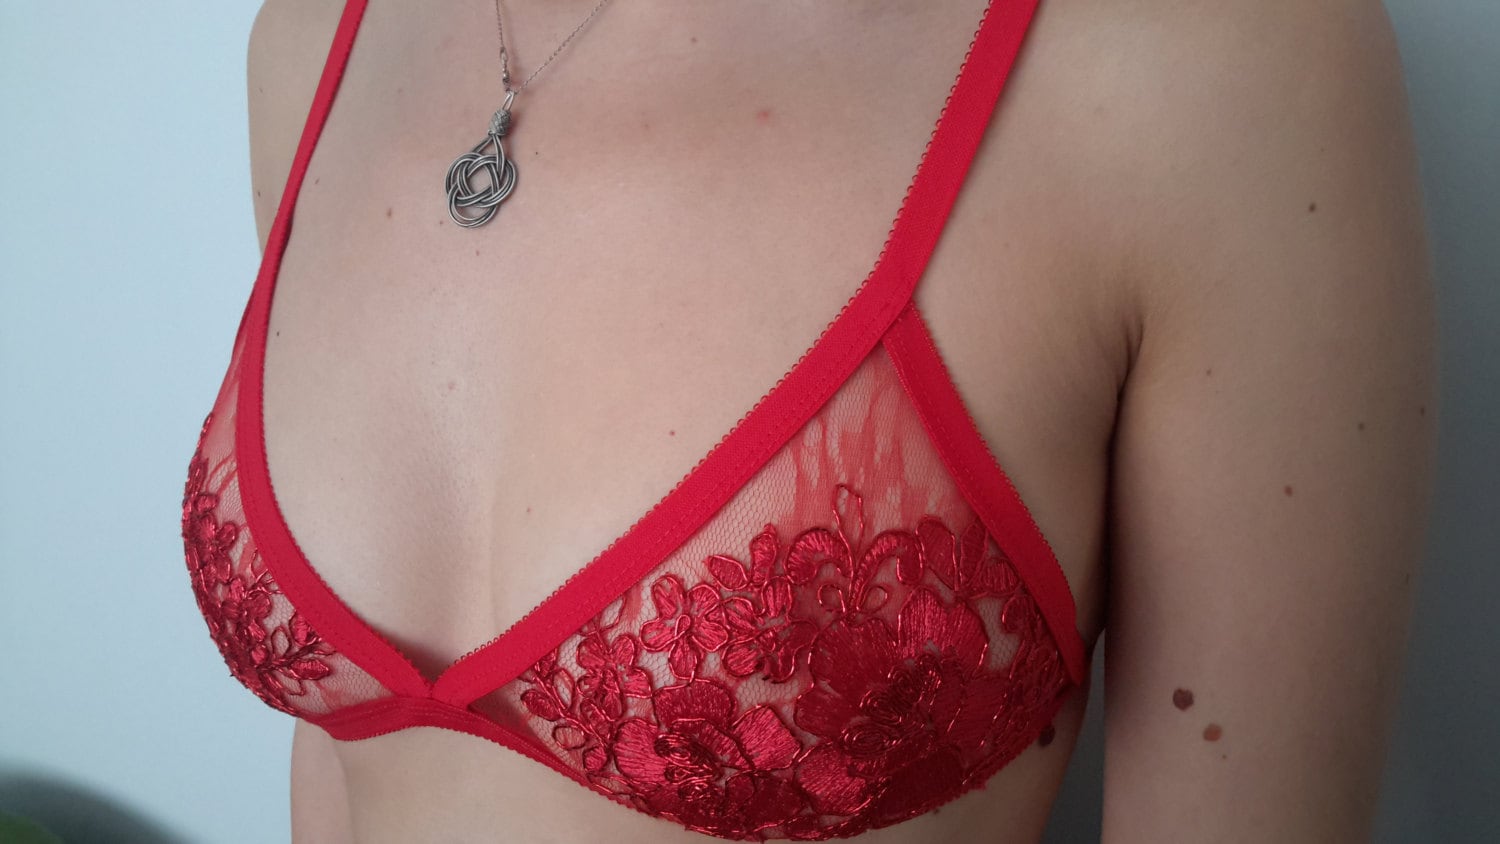 Lace,red Bra,triangle Bra,lingerie, Gift for Her, Xmas Gift, Valentine's  Day Gift, Red Lace Bra, Lace Lingerie, Unlined Bra -  Canada